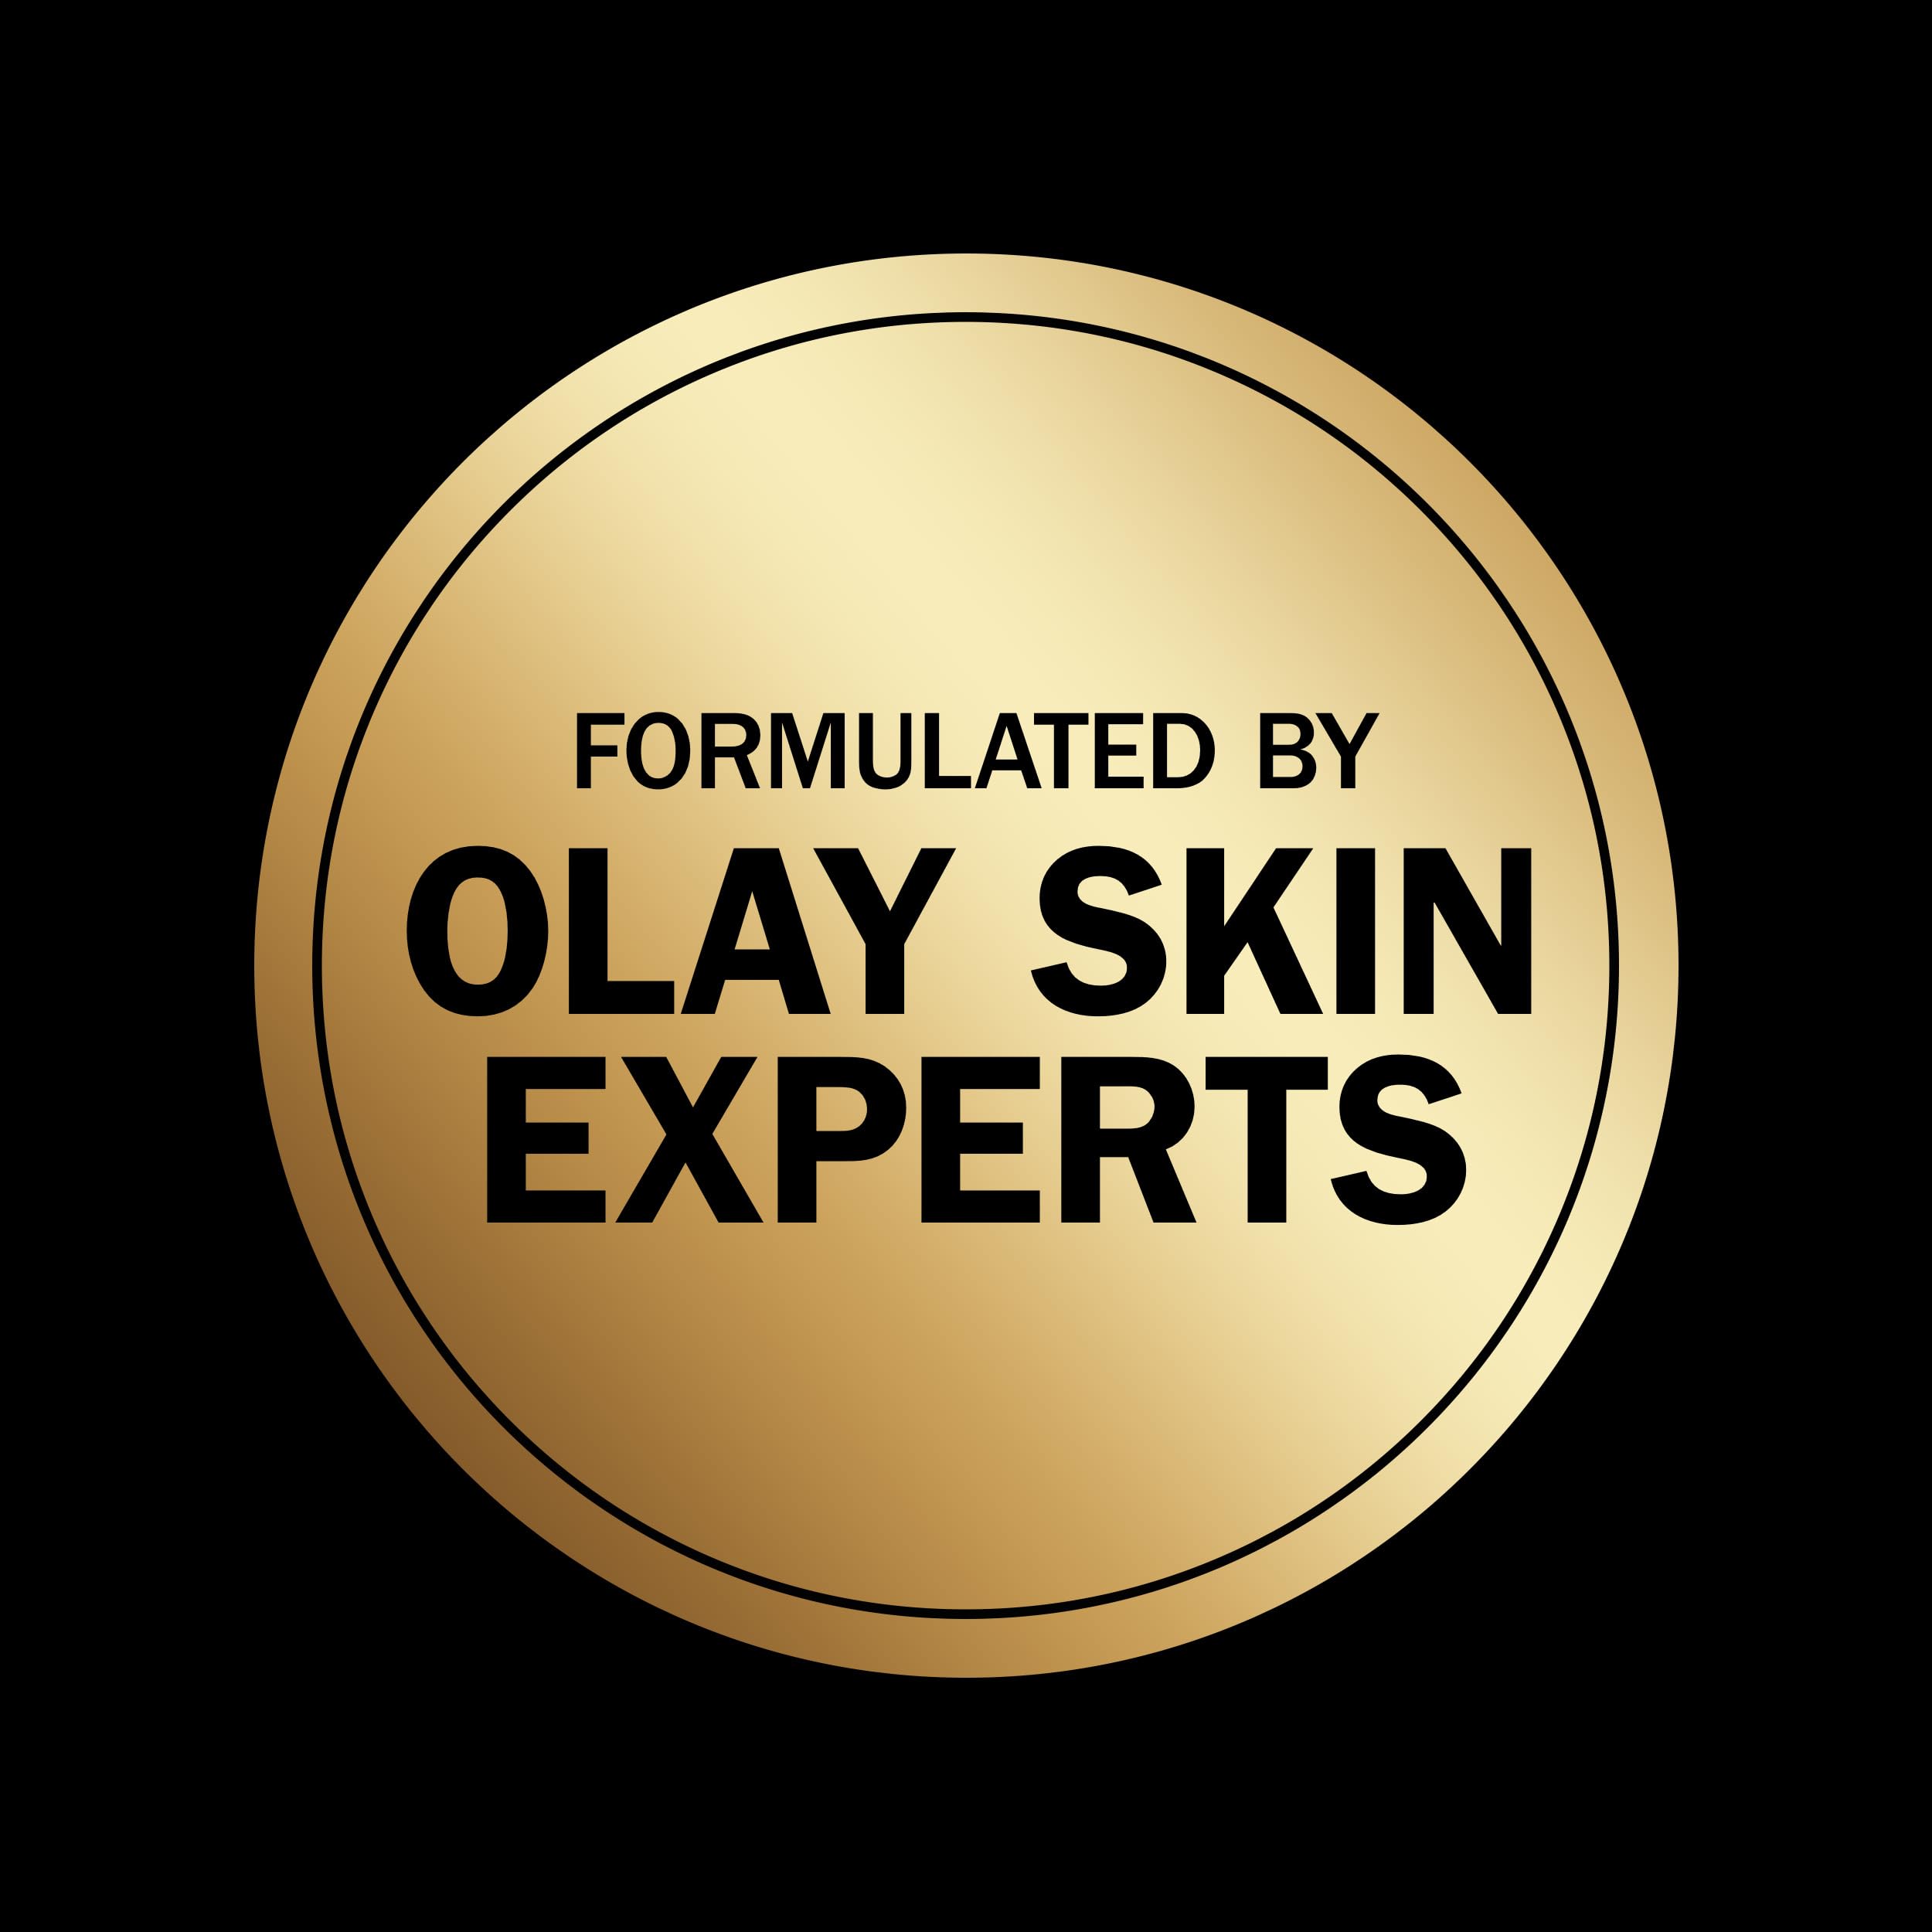 Olay Ultra Moisture Body Wash with Shea Butter, 30 Oz